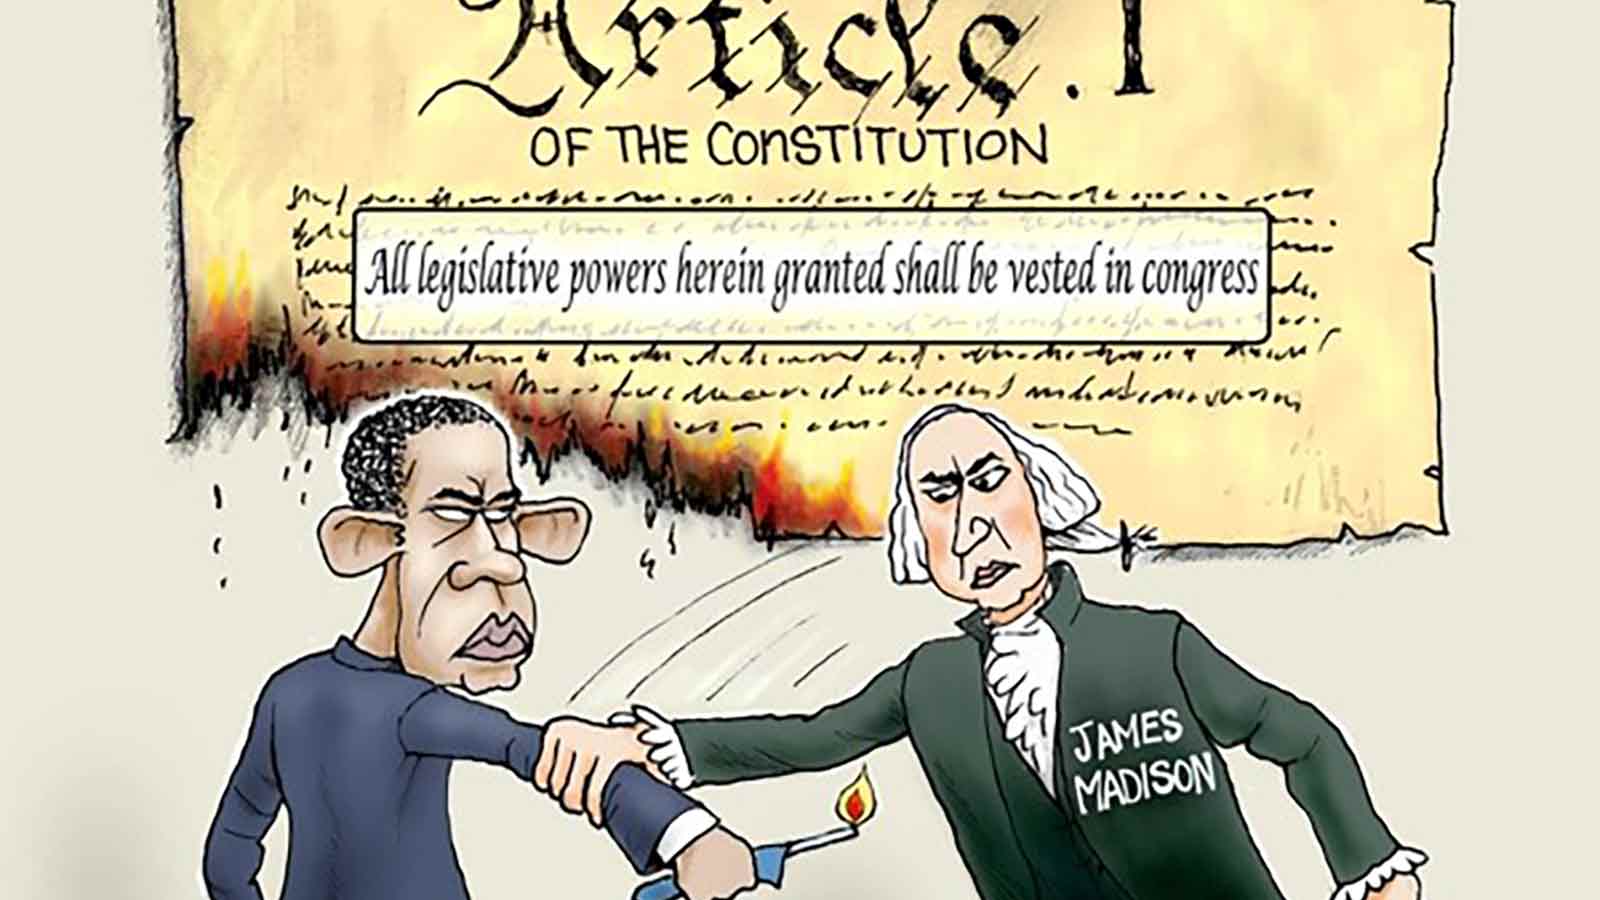 James Madison stops Barack Obama from relighting the Constitution, illustrating the Constitution design in Article I that All legislative powers herein granted shall be vested in congress.